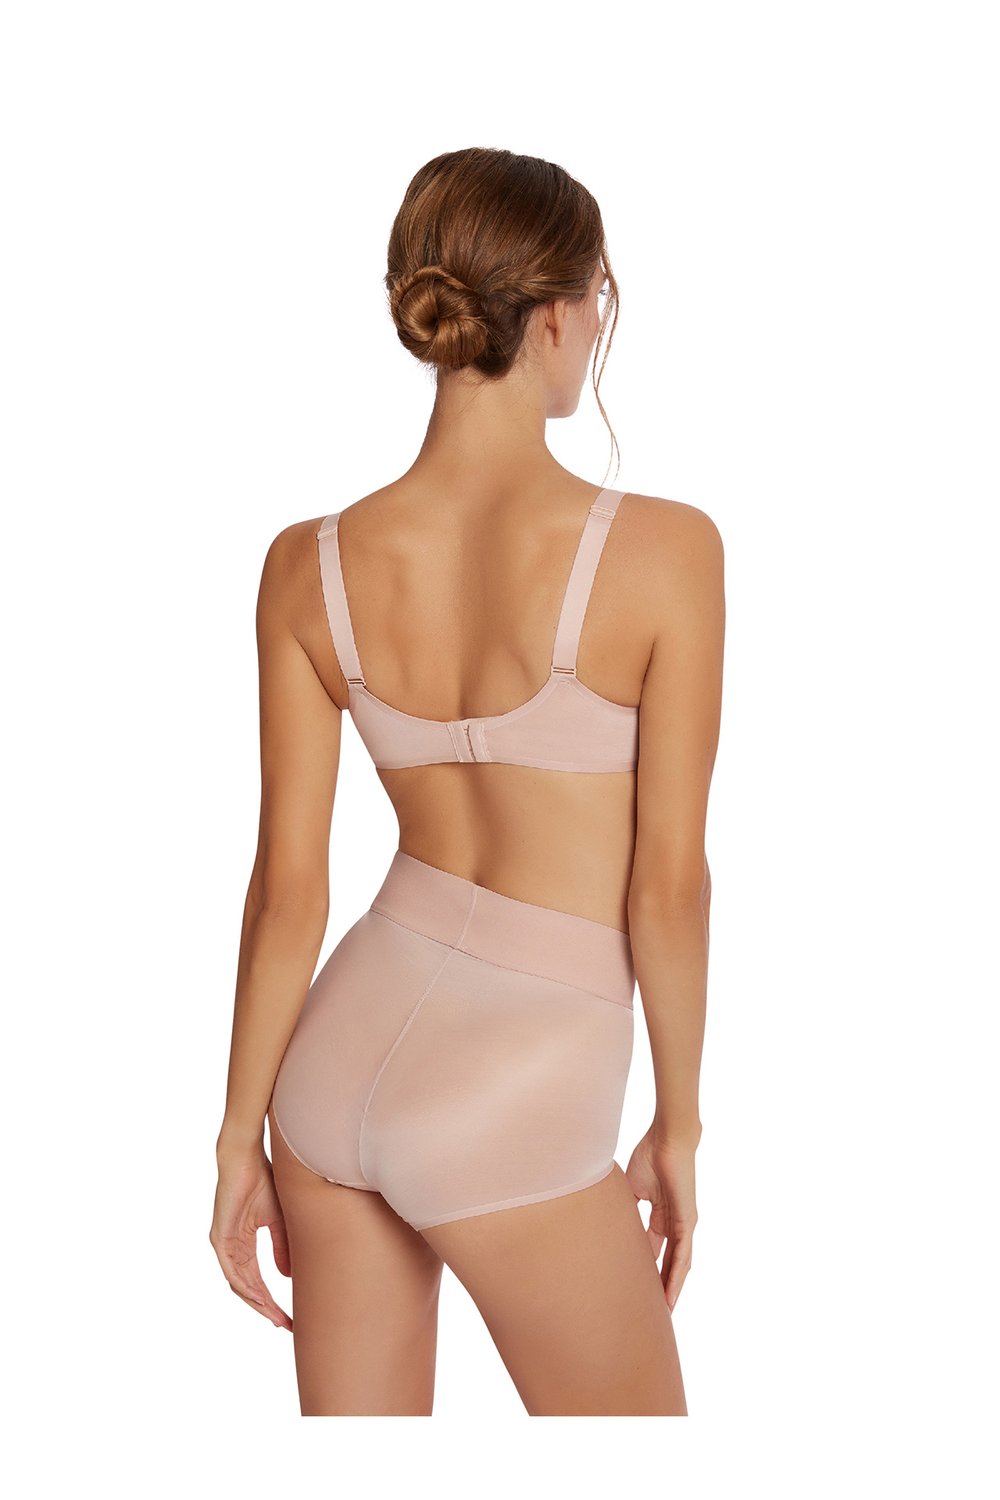 Sheer Touch Panty - Wolford Store Sale Lingerie